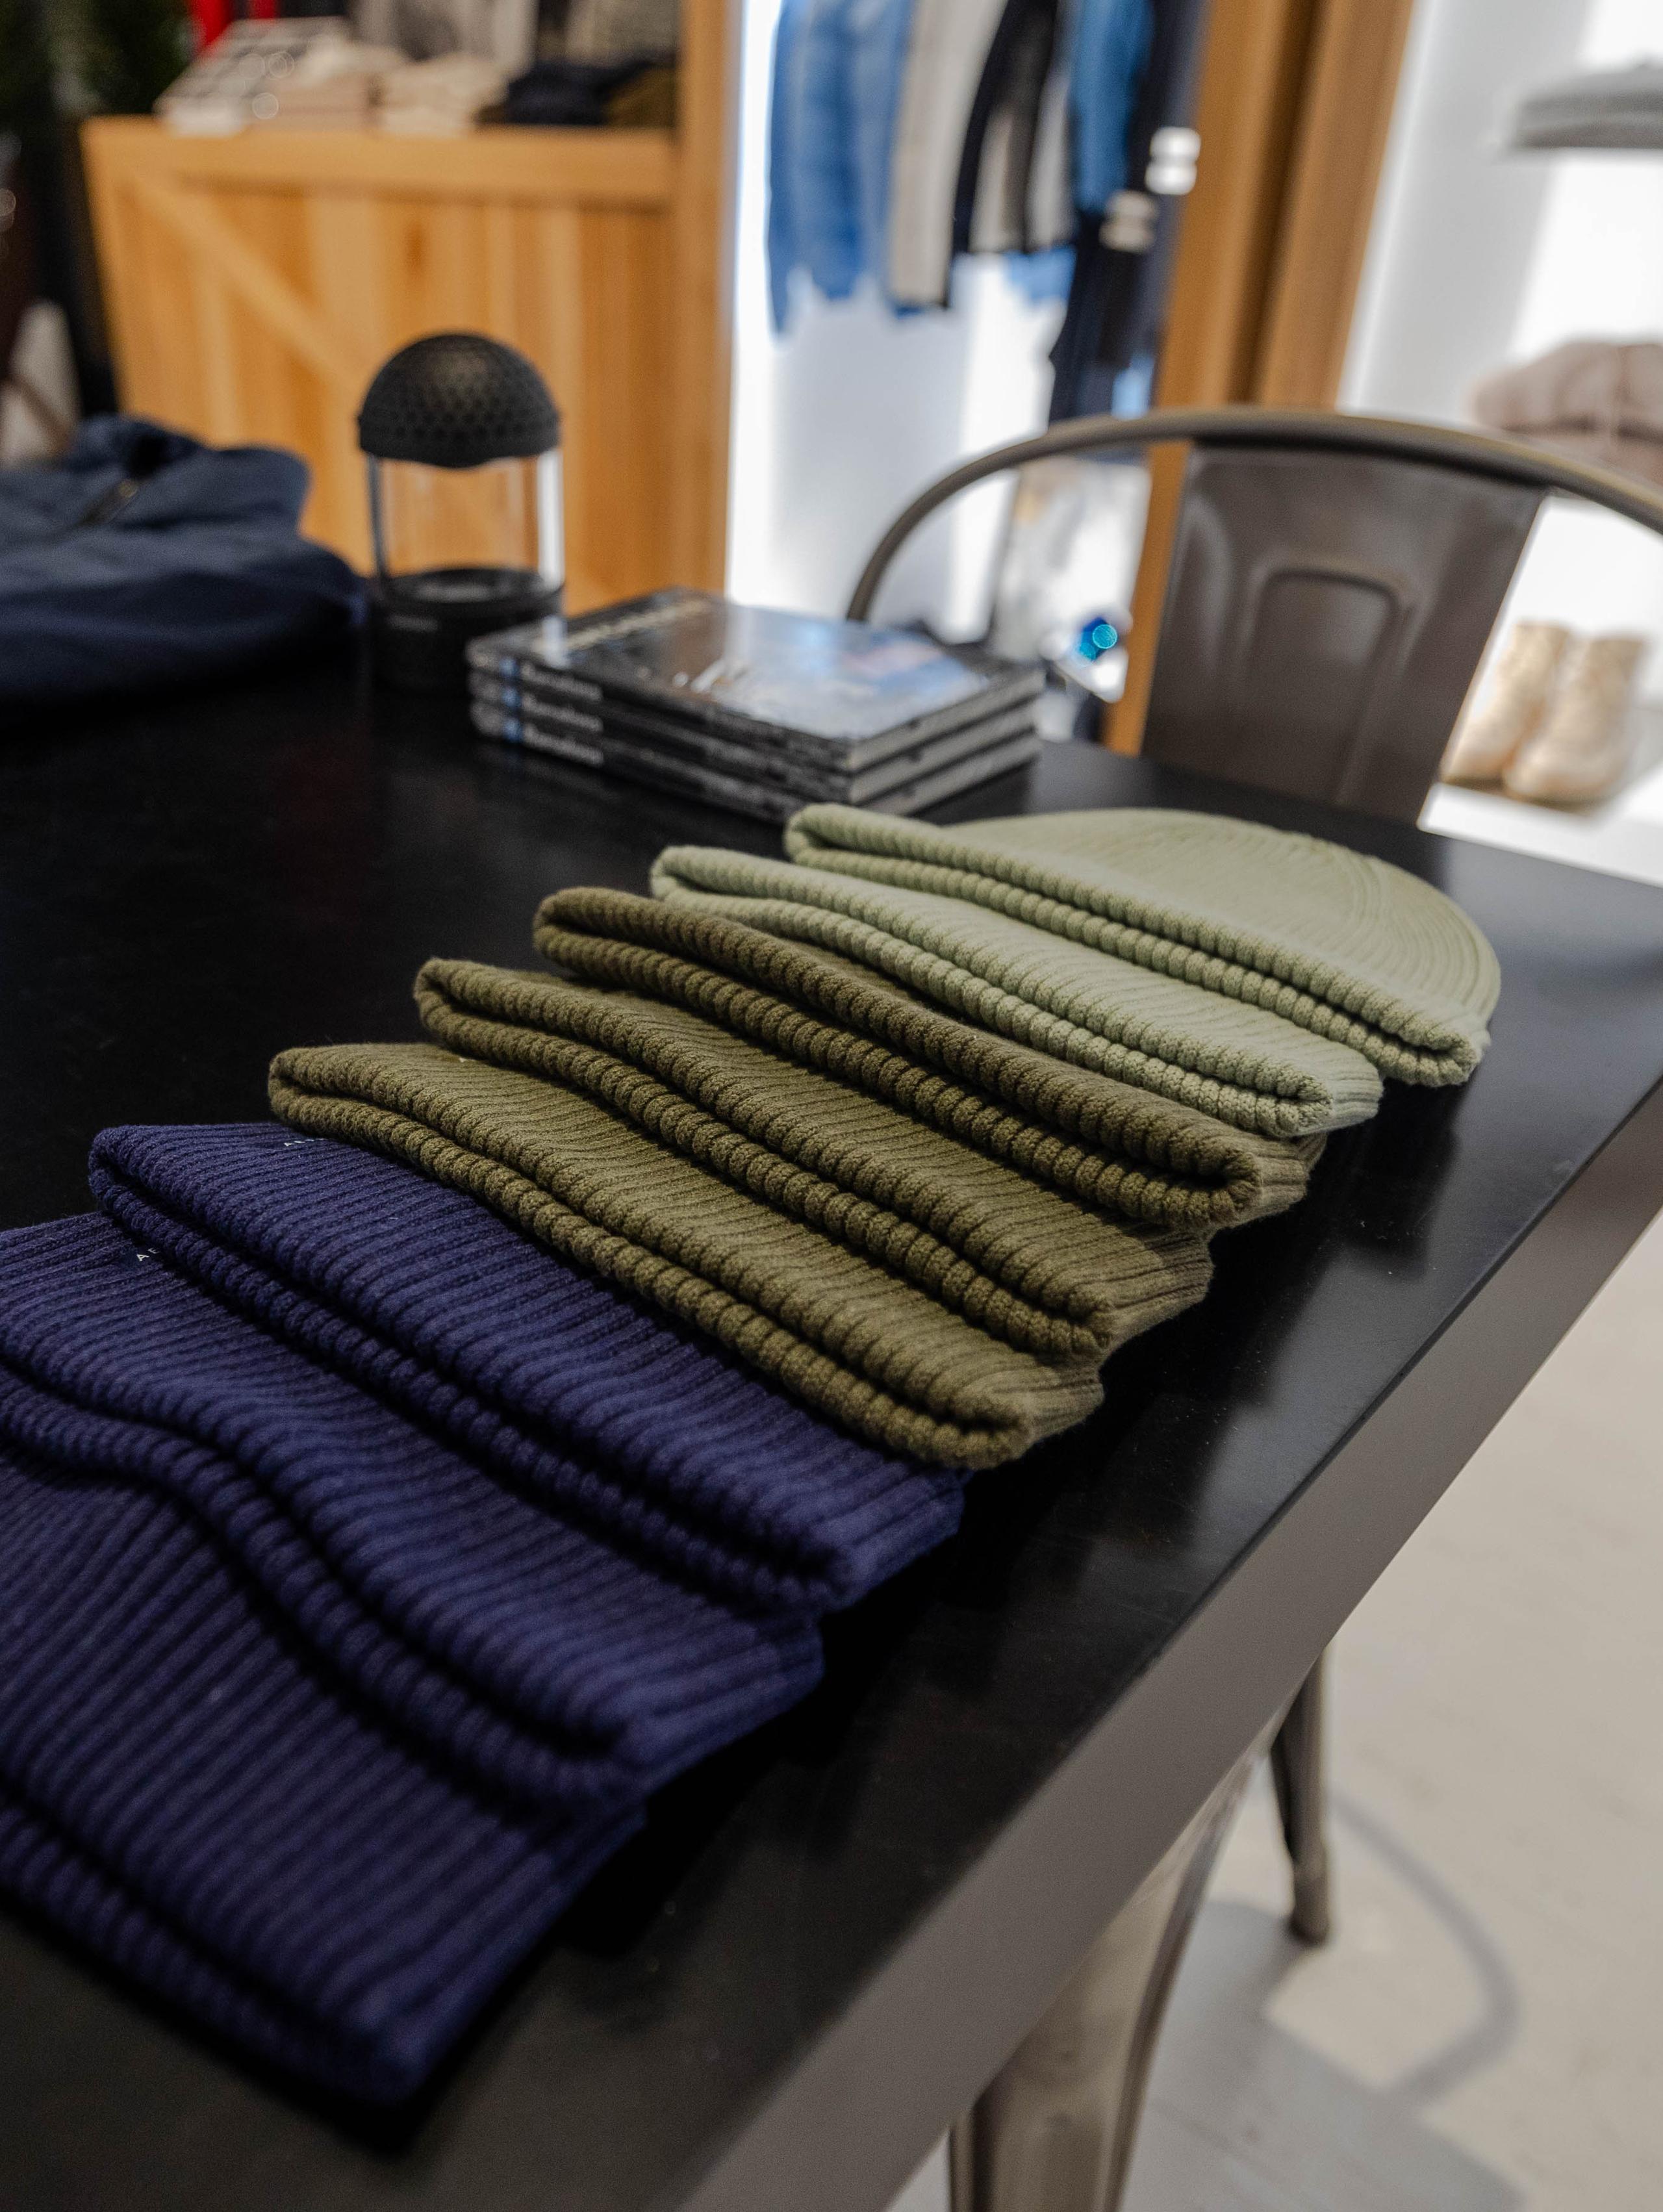 Variety of colored beanies on table display